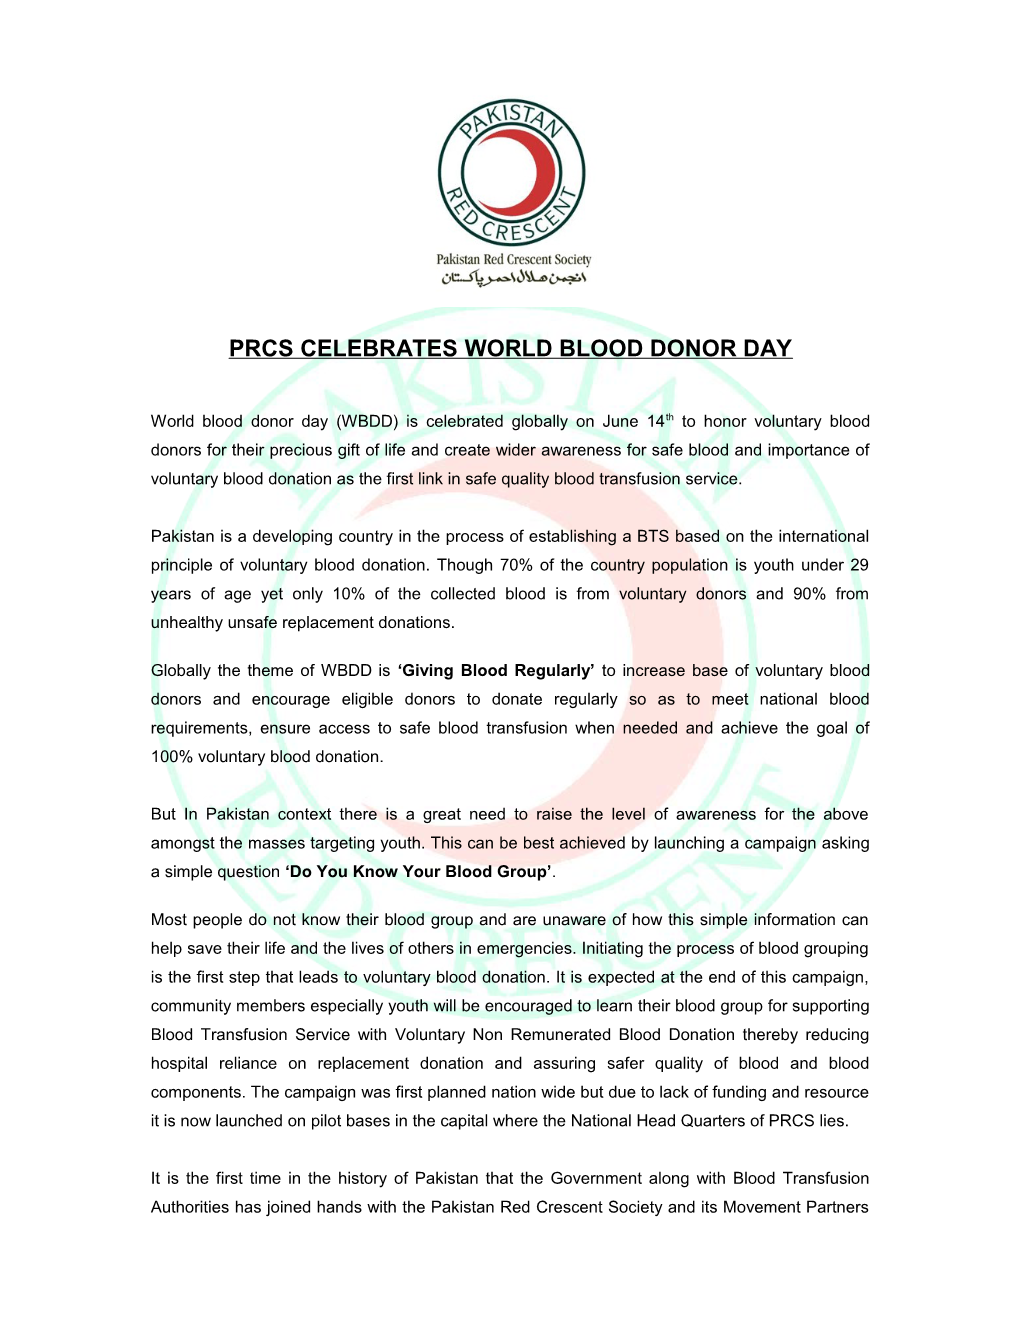 World Blood Donor Day Is Celebrated Globally on June 14Th to Honor Voluntary Blood Donors